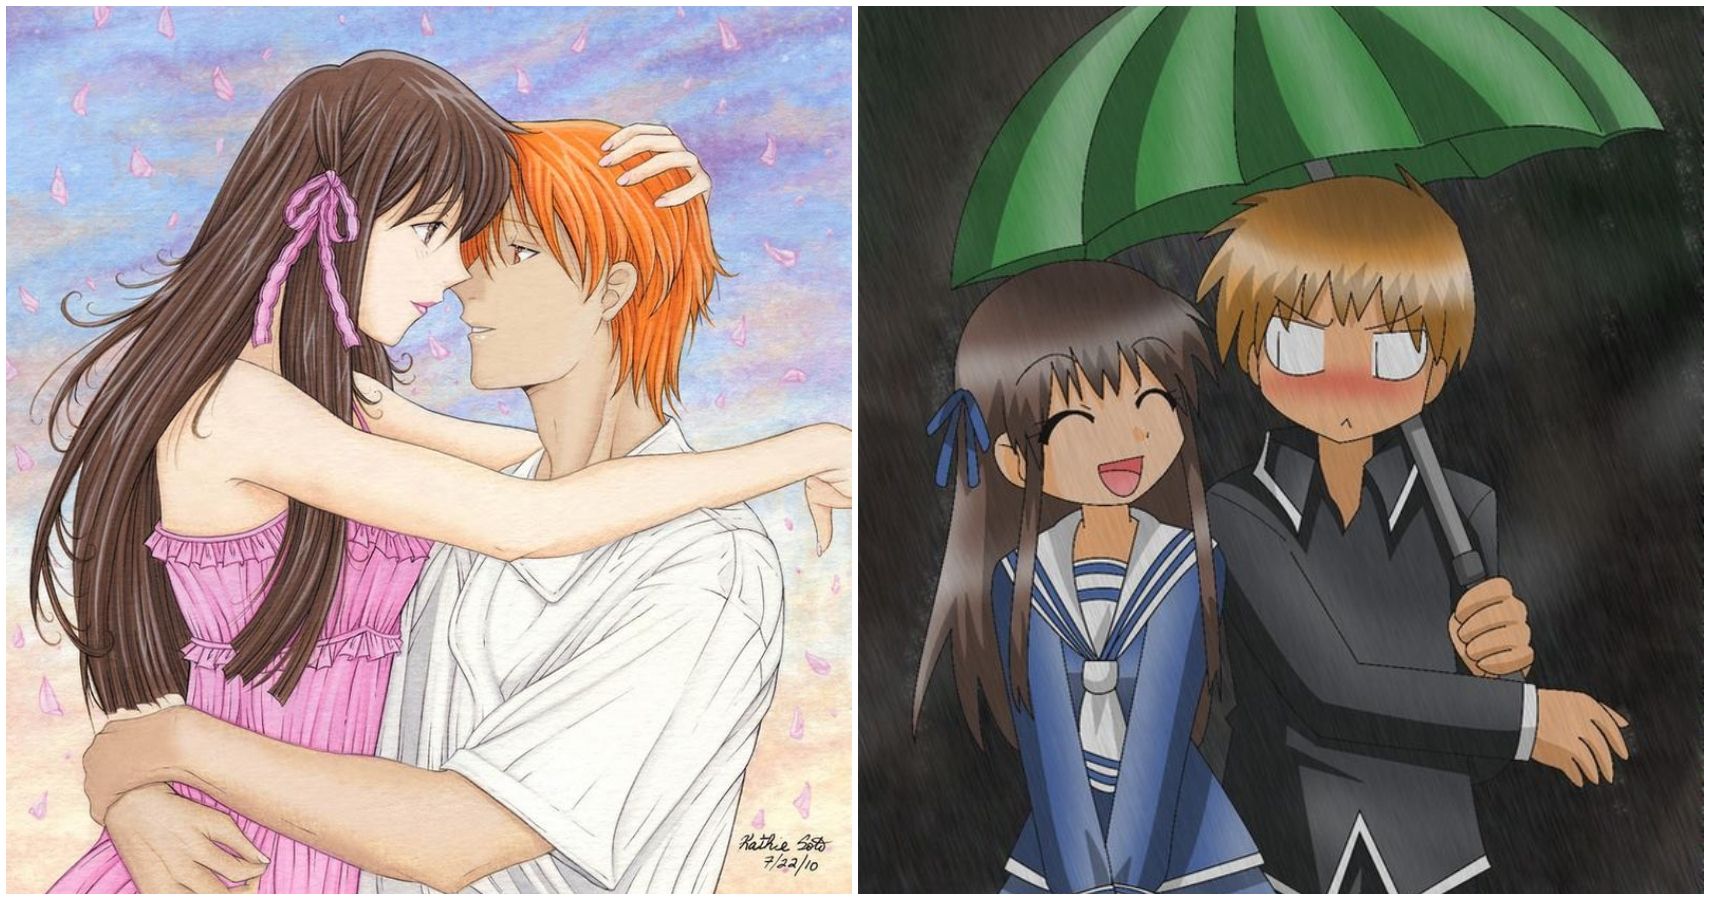 Our World - Here is Tohru x Kyo from Fruits Basket for